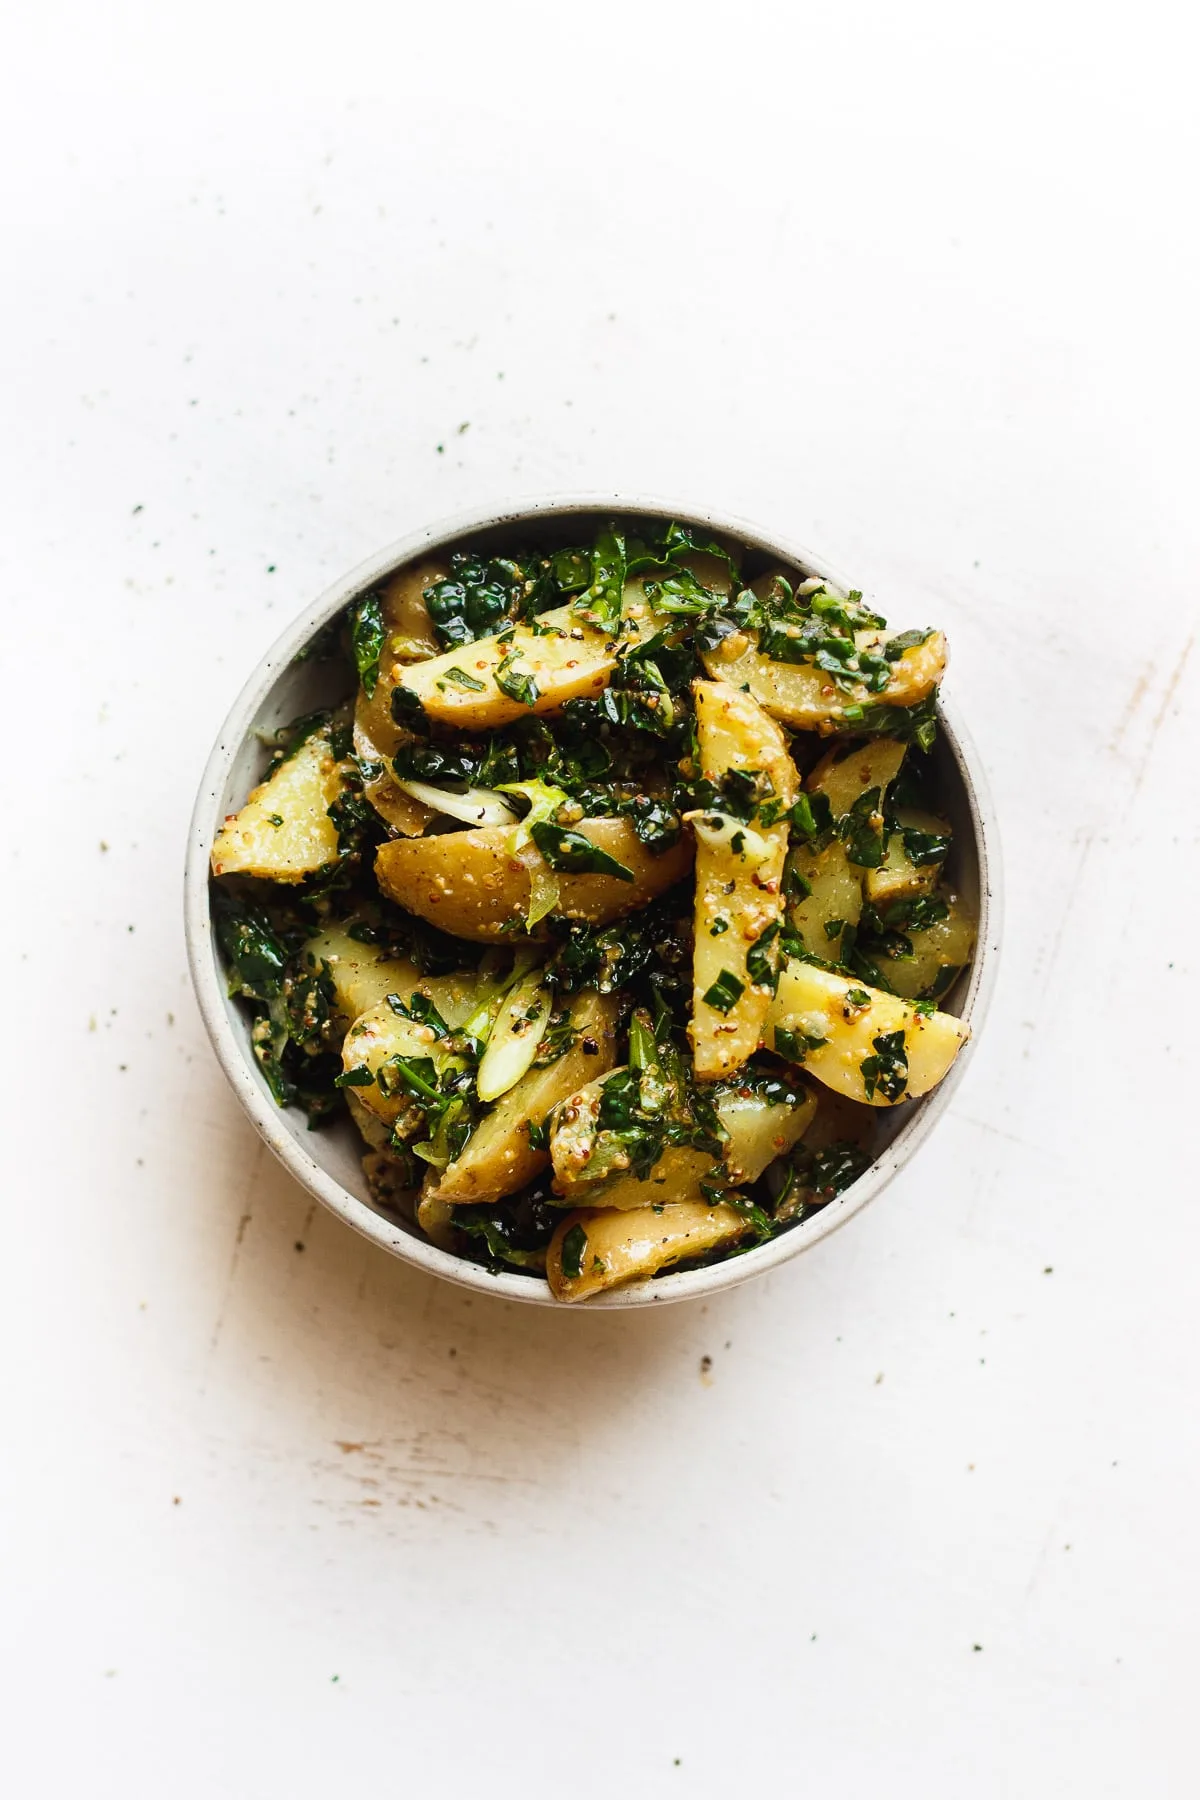 kale potato salad with grainy mustard dressing in a bowl